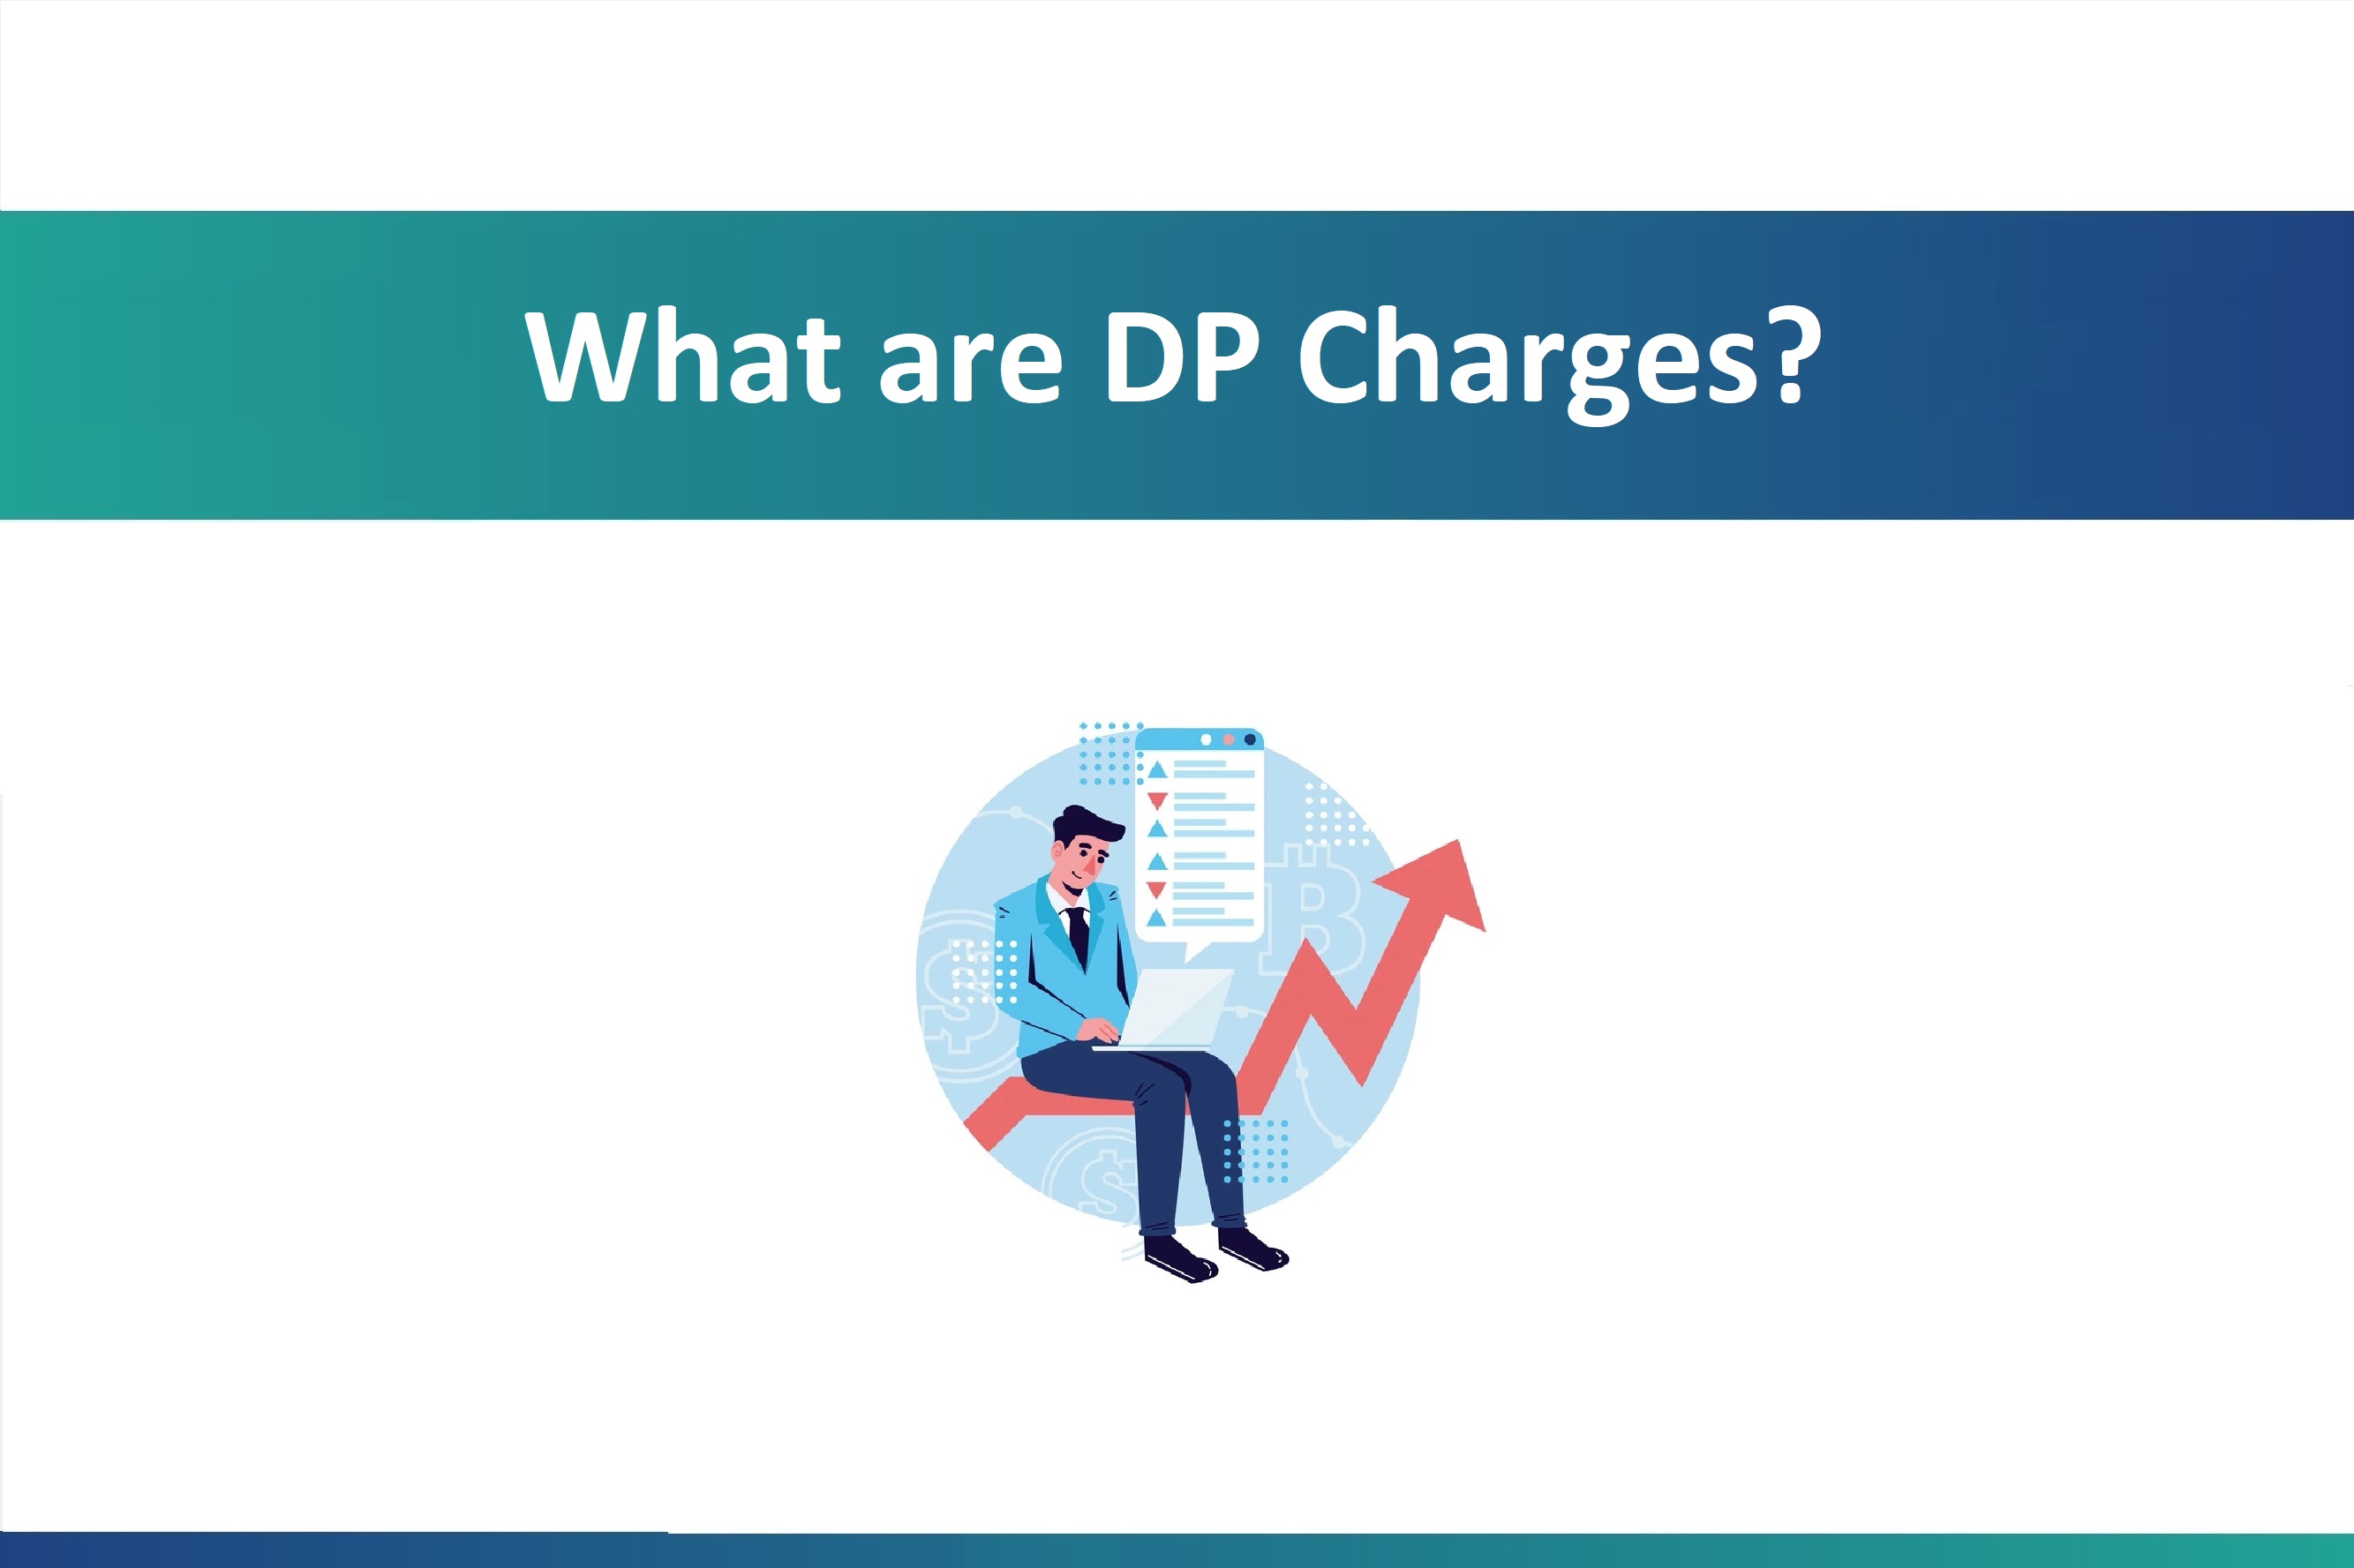 What are DP charges (depository participant charges)?